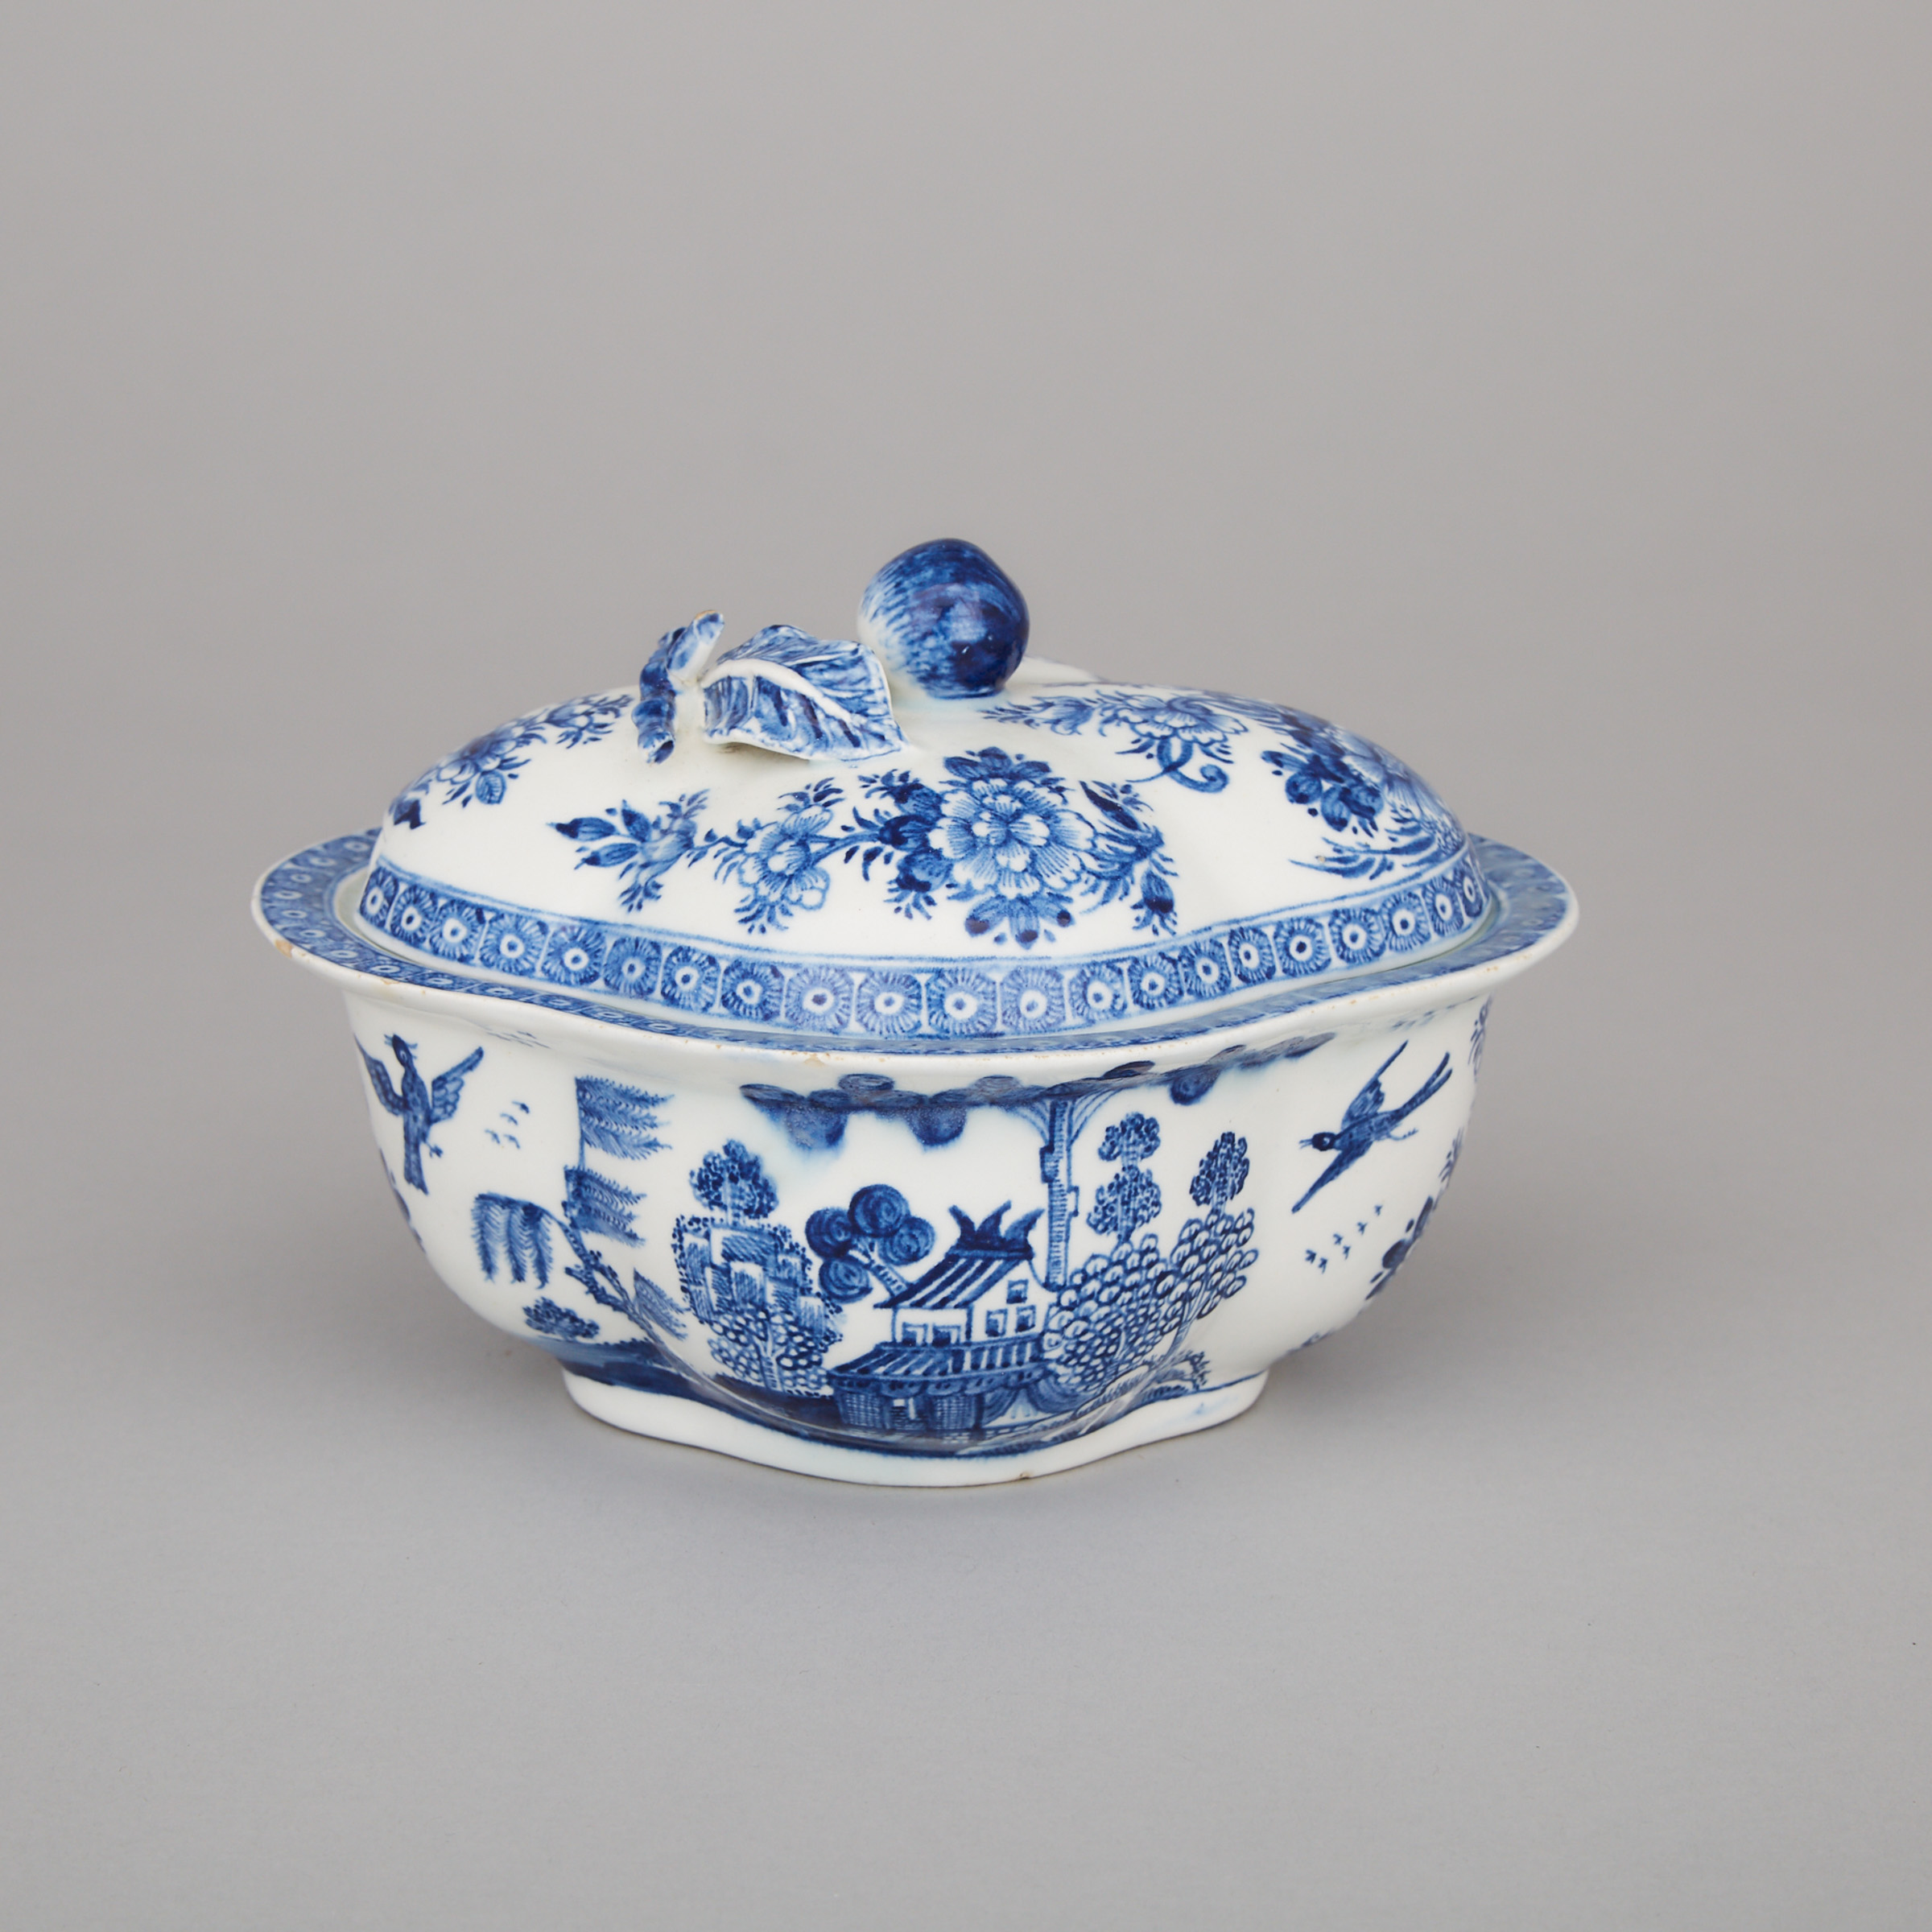 Bow Blue and White Quatrefoil Sauce Tureen and Cover, c.1765